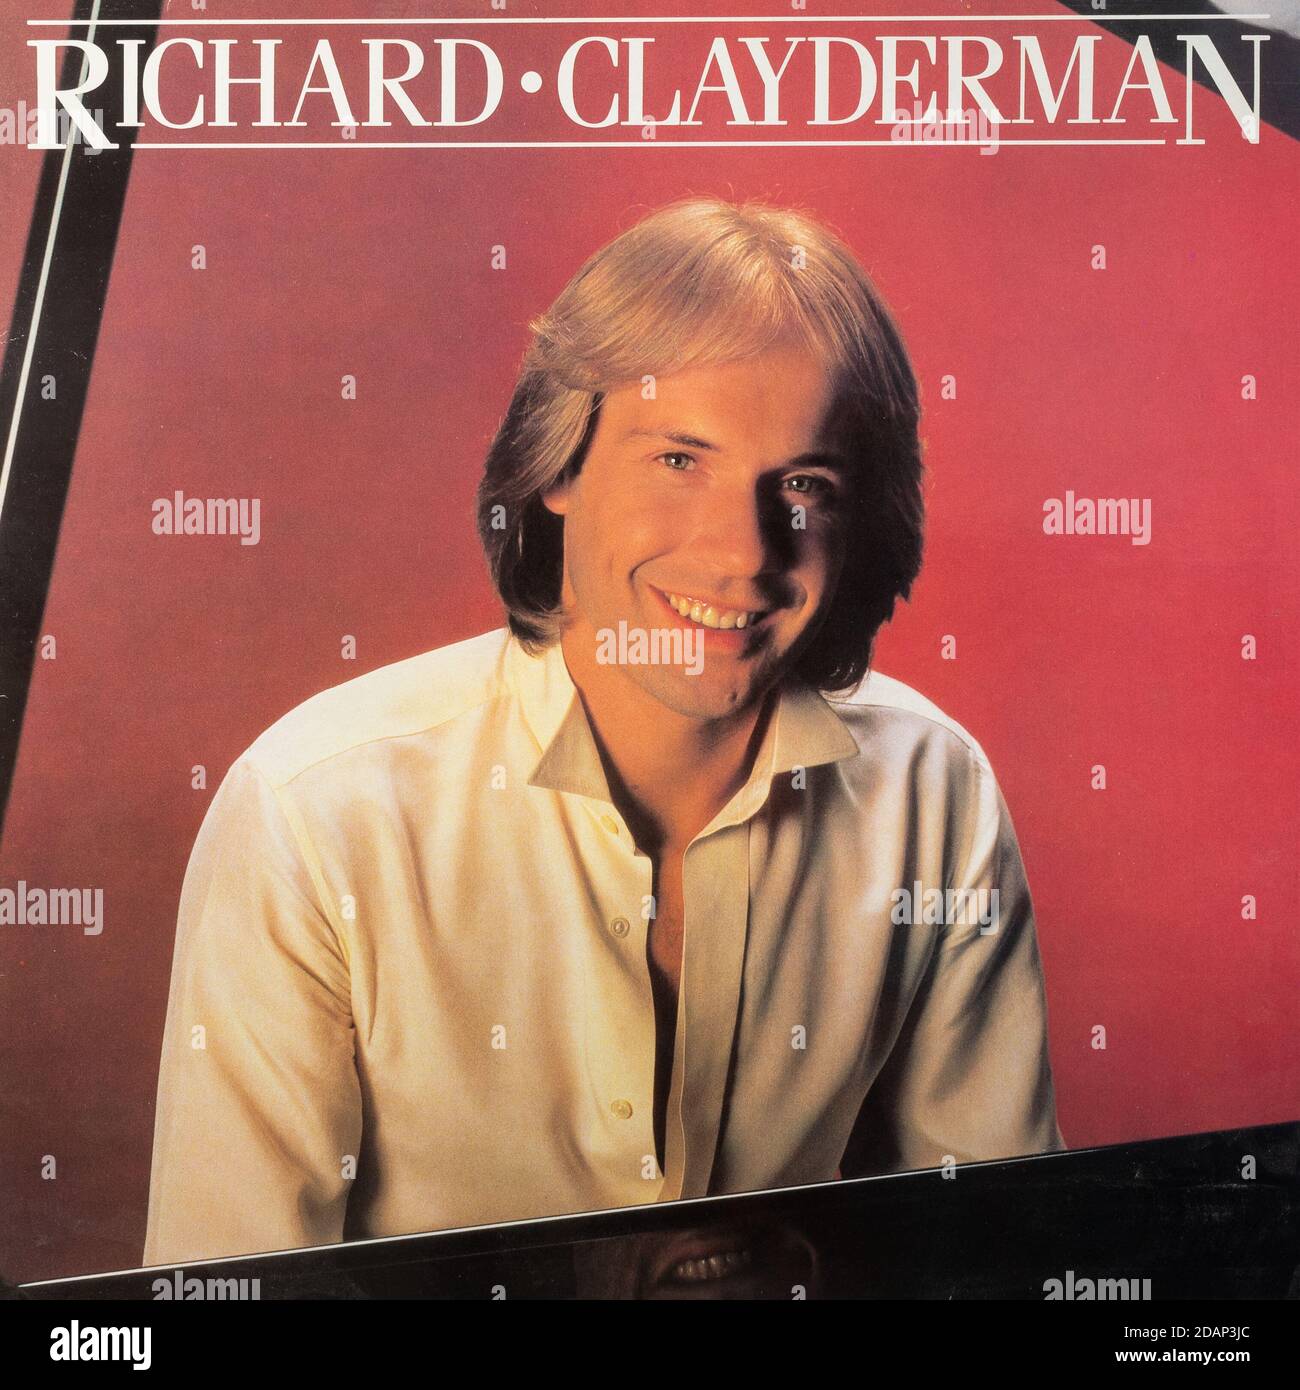 Richard Clayderman vinyl LP record album cover, 1982, compilation by the french pianist Stock Photo